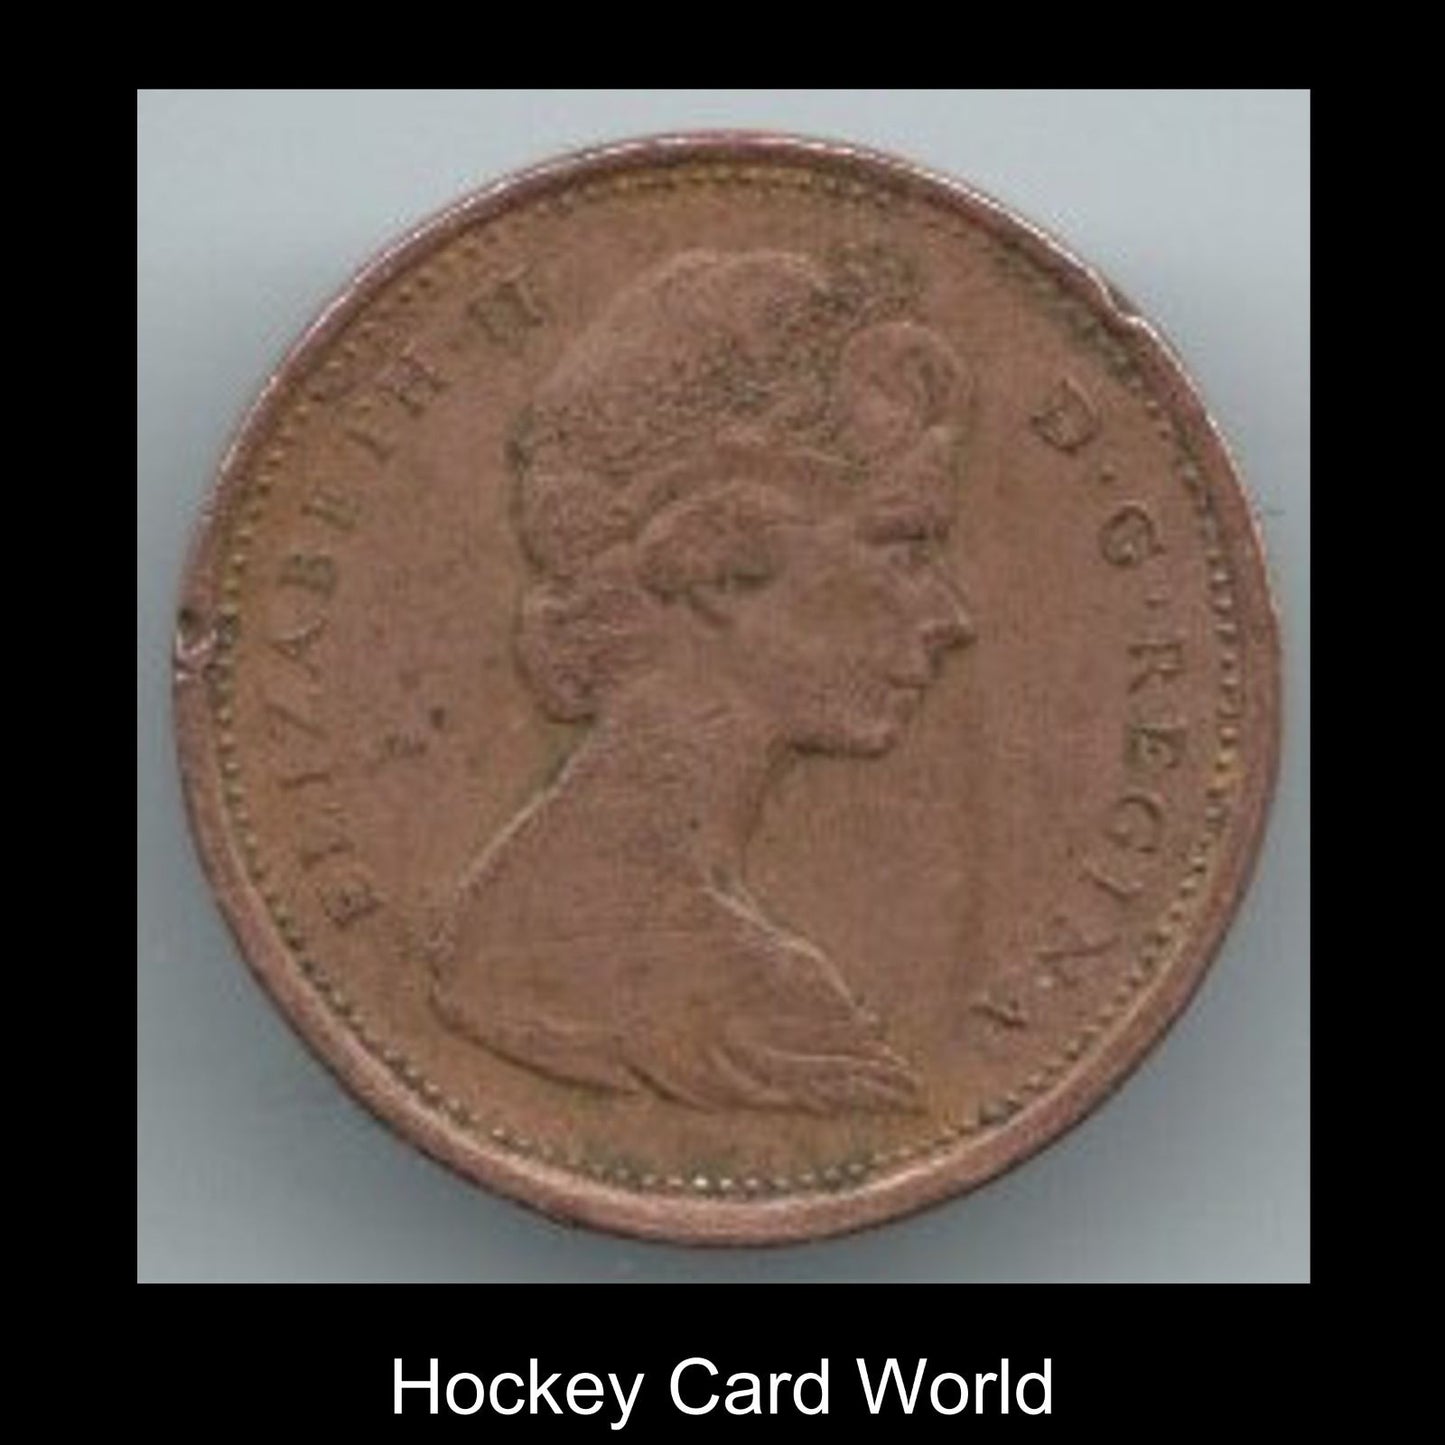  1968 Canadian 1 Cent Penny Coin Canada - Uncirculated Now *8002 Image 2